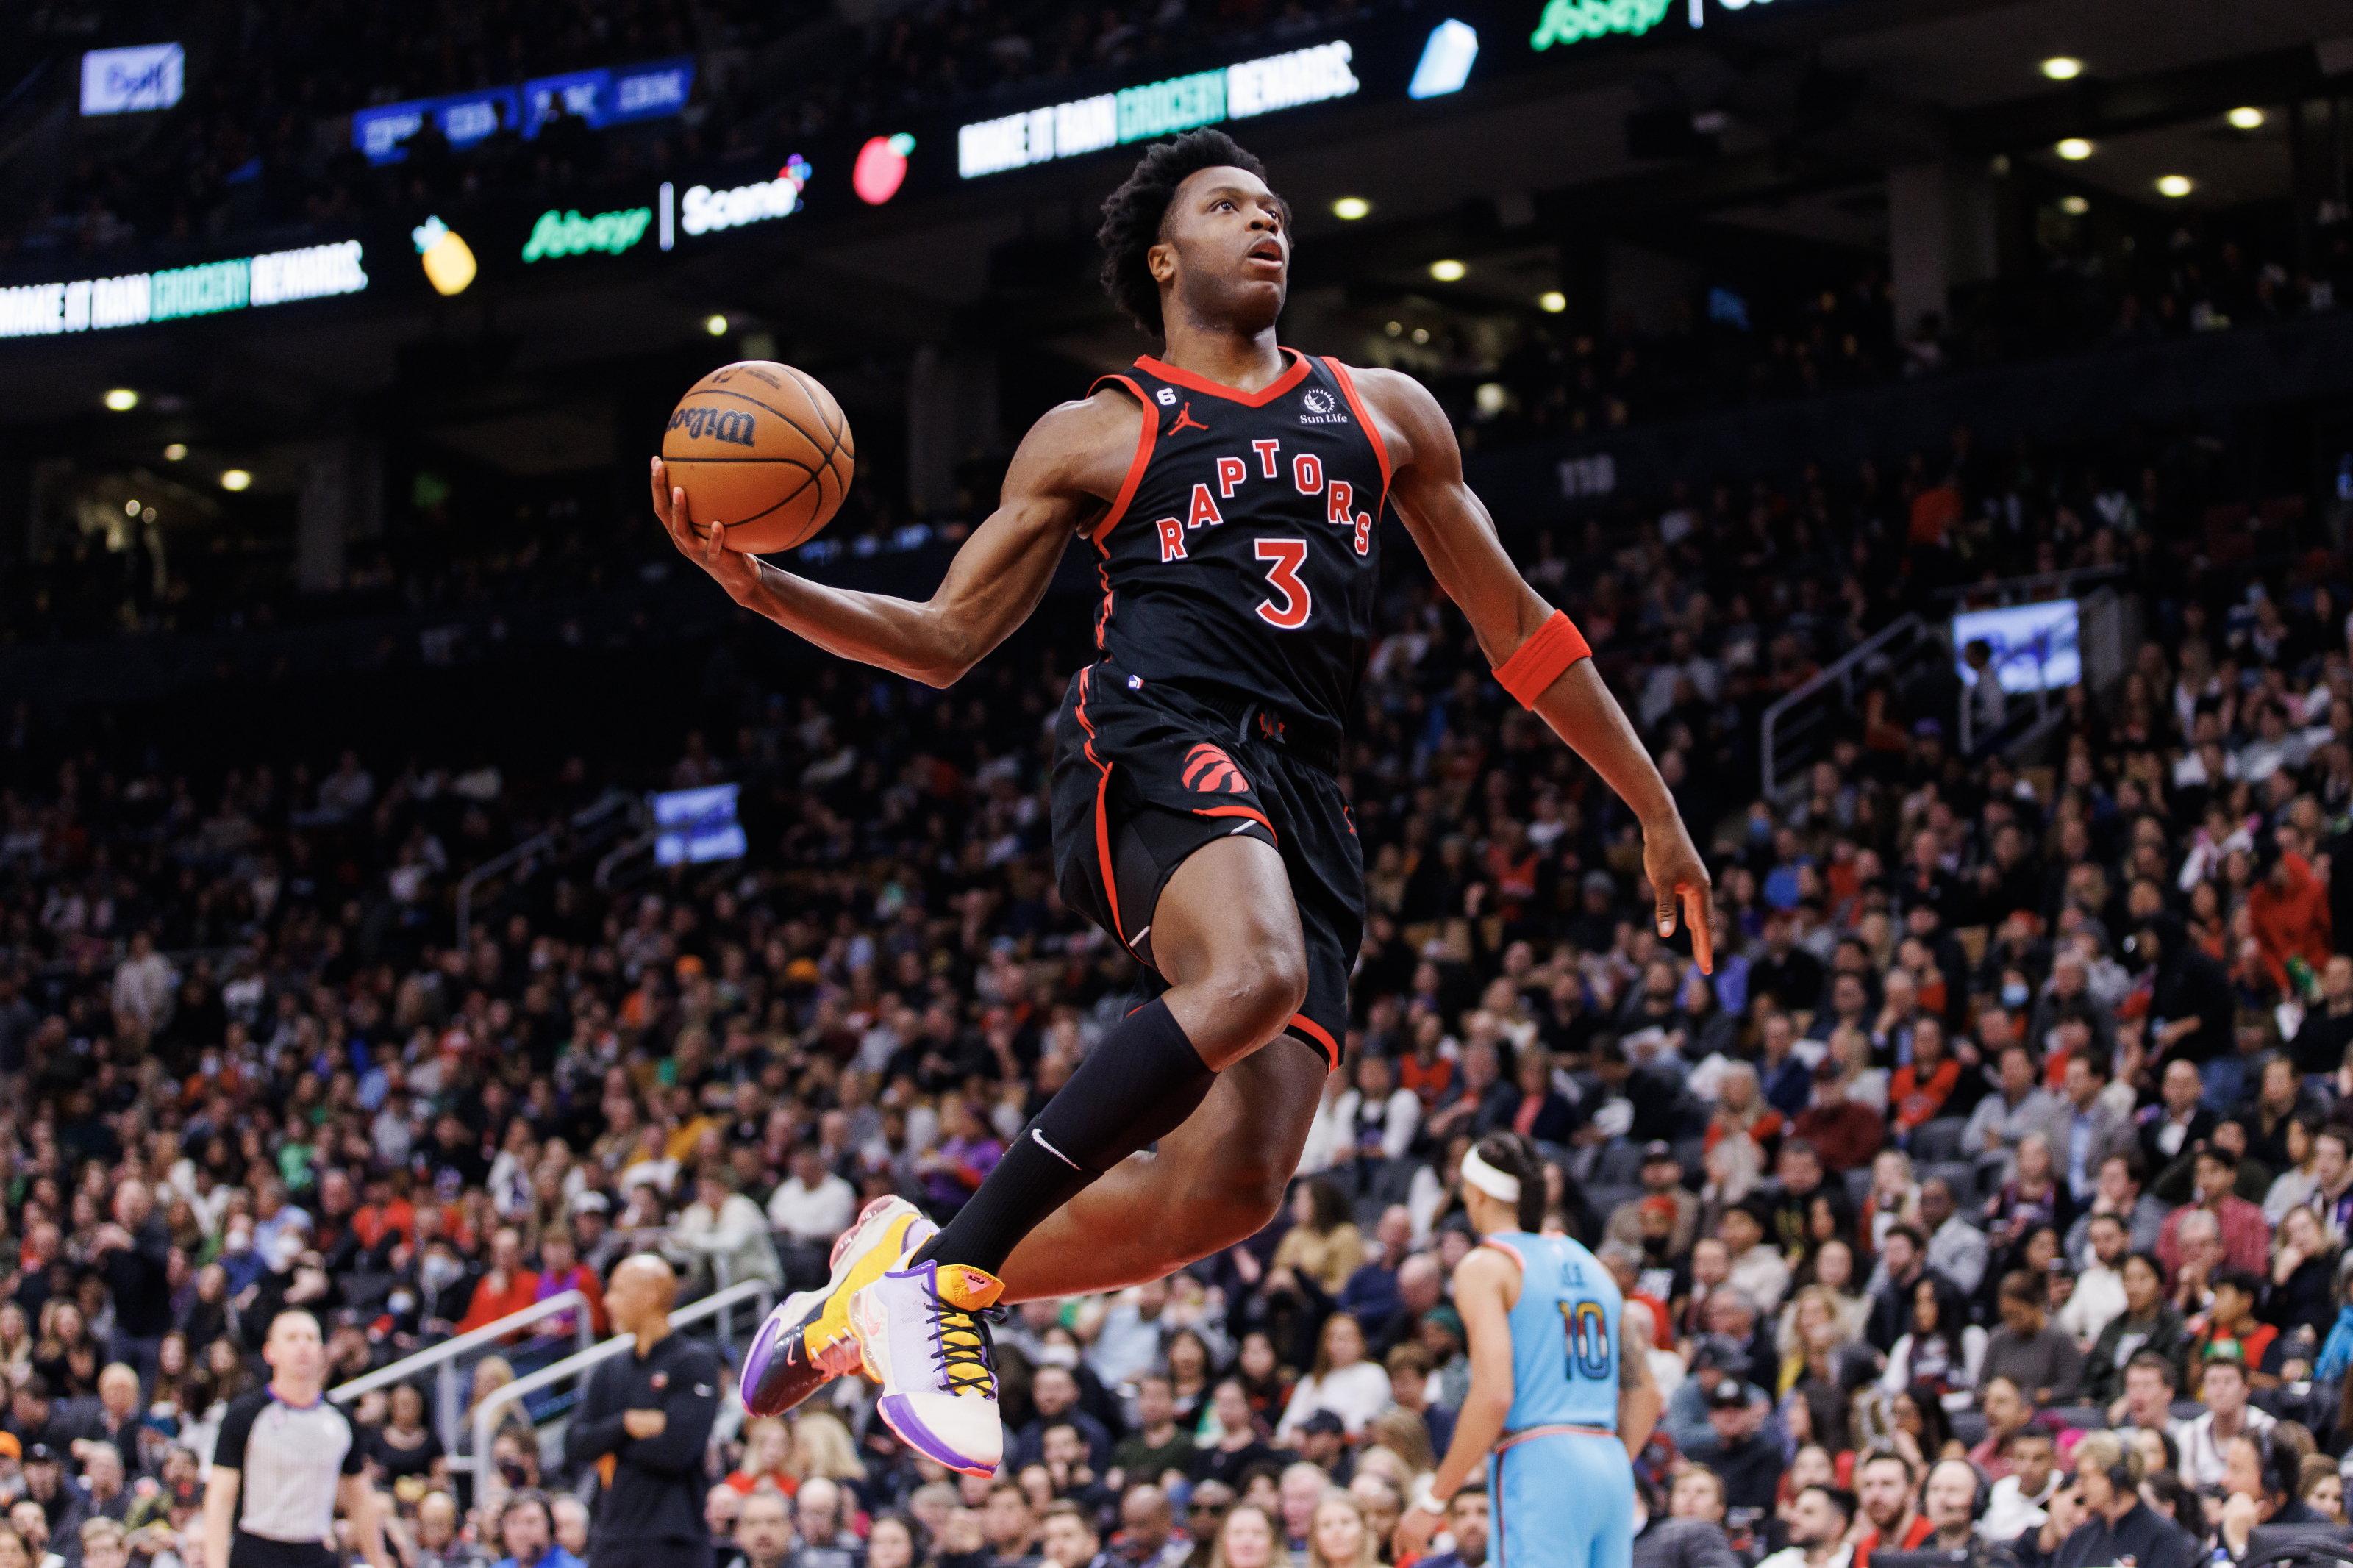 OG Anunoby DPOY case gets stronger in Raptors-Wizards chaos